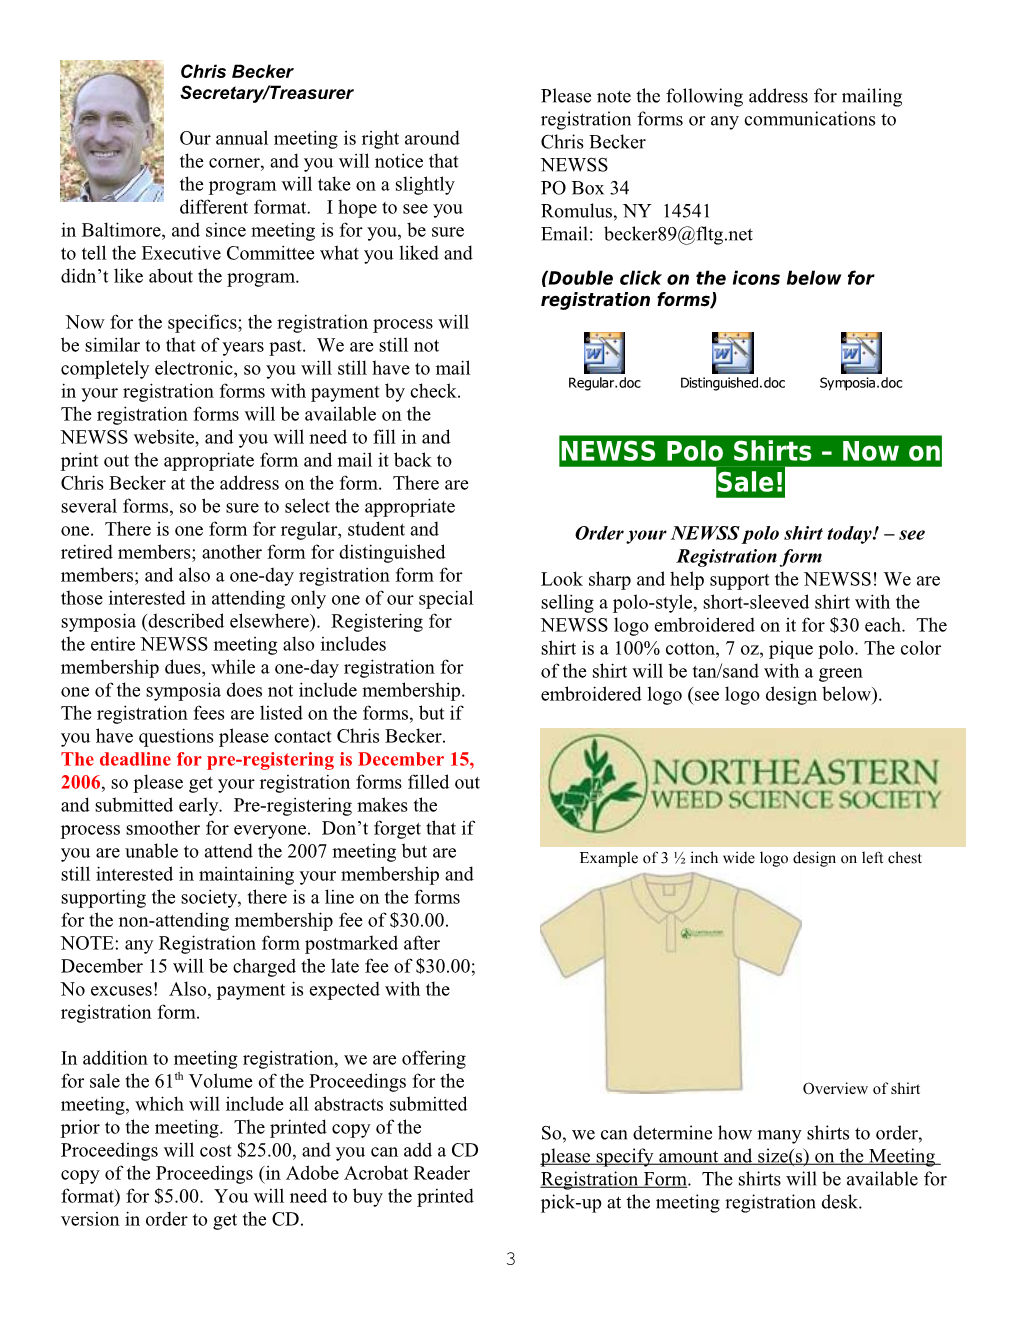 NORTHEASTERN WEED SCIENCE SOCIETY Newsletter